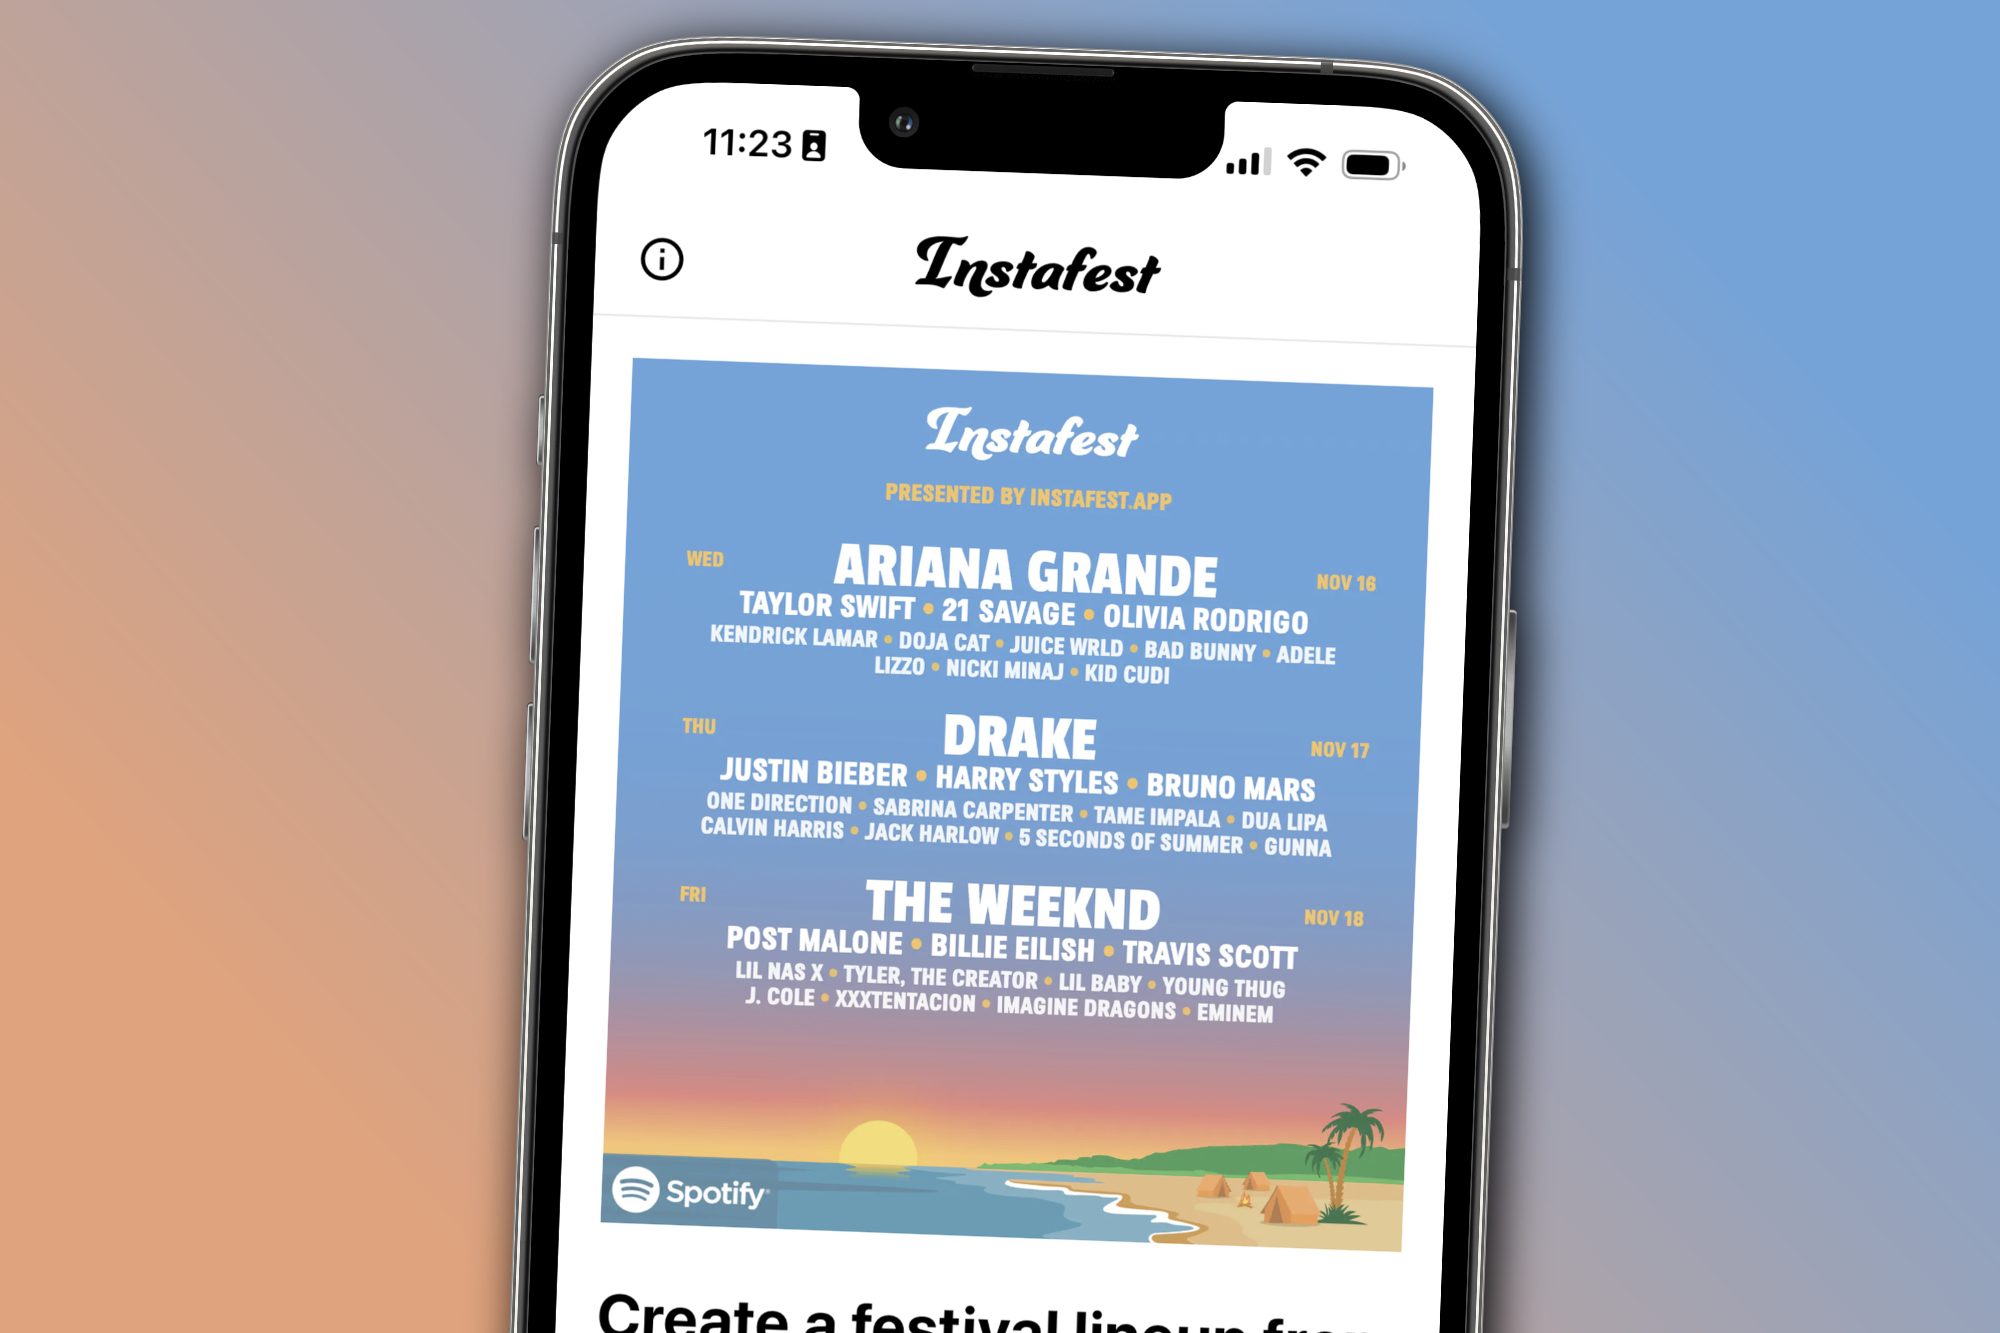 Instafest app: How to your Spotify lineup | Trends